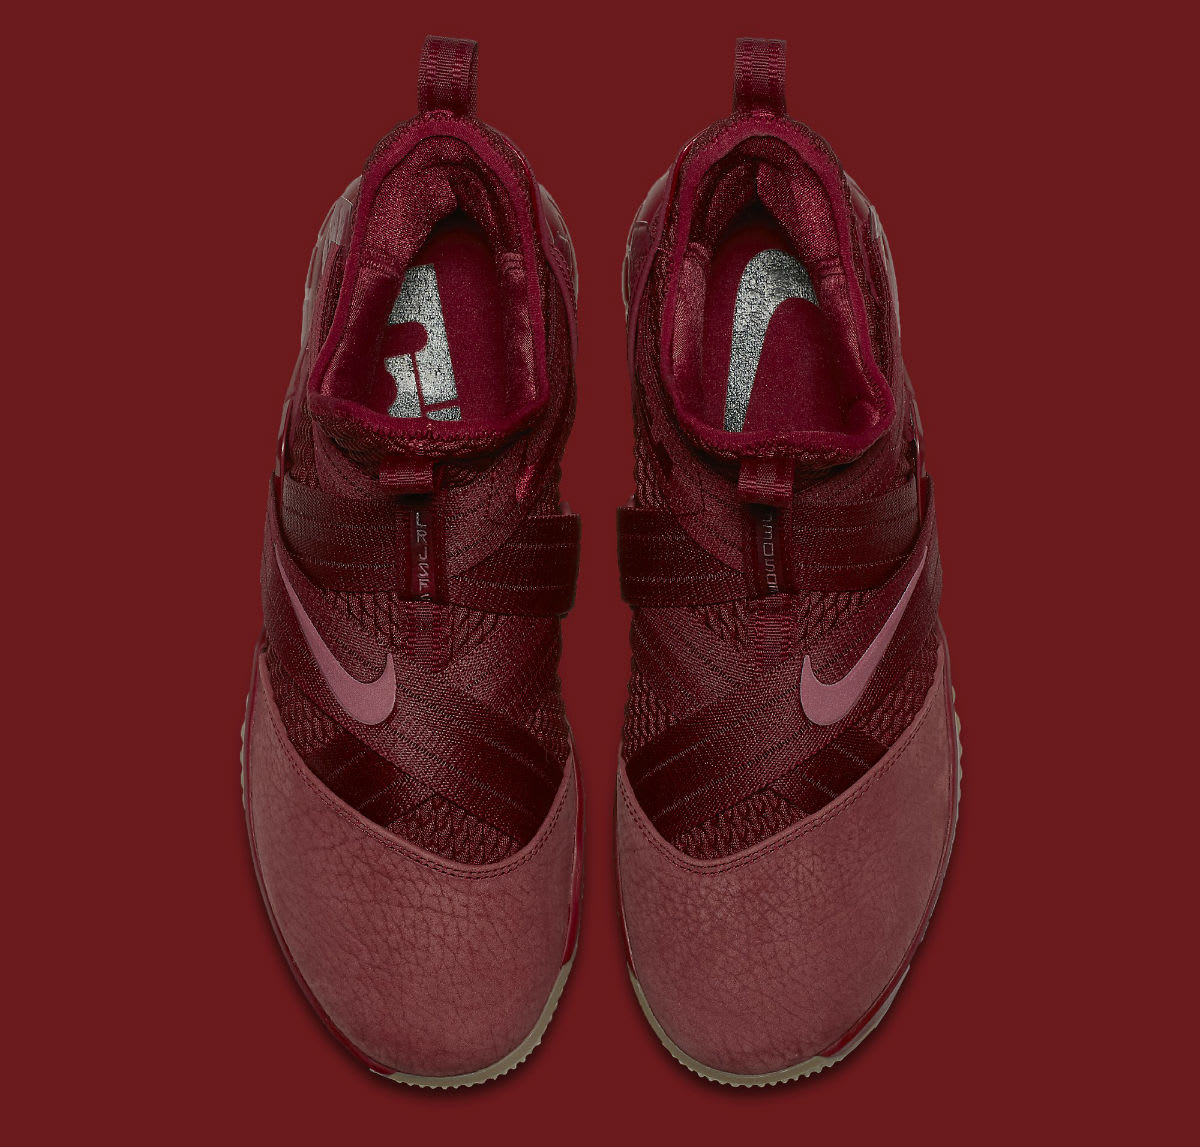 Nike LeBron Soldier 12 XII Team Red Cavs Release Date AO4055-600 Top